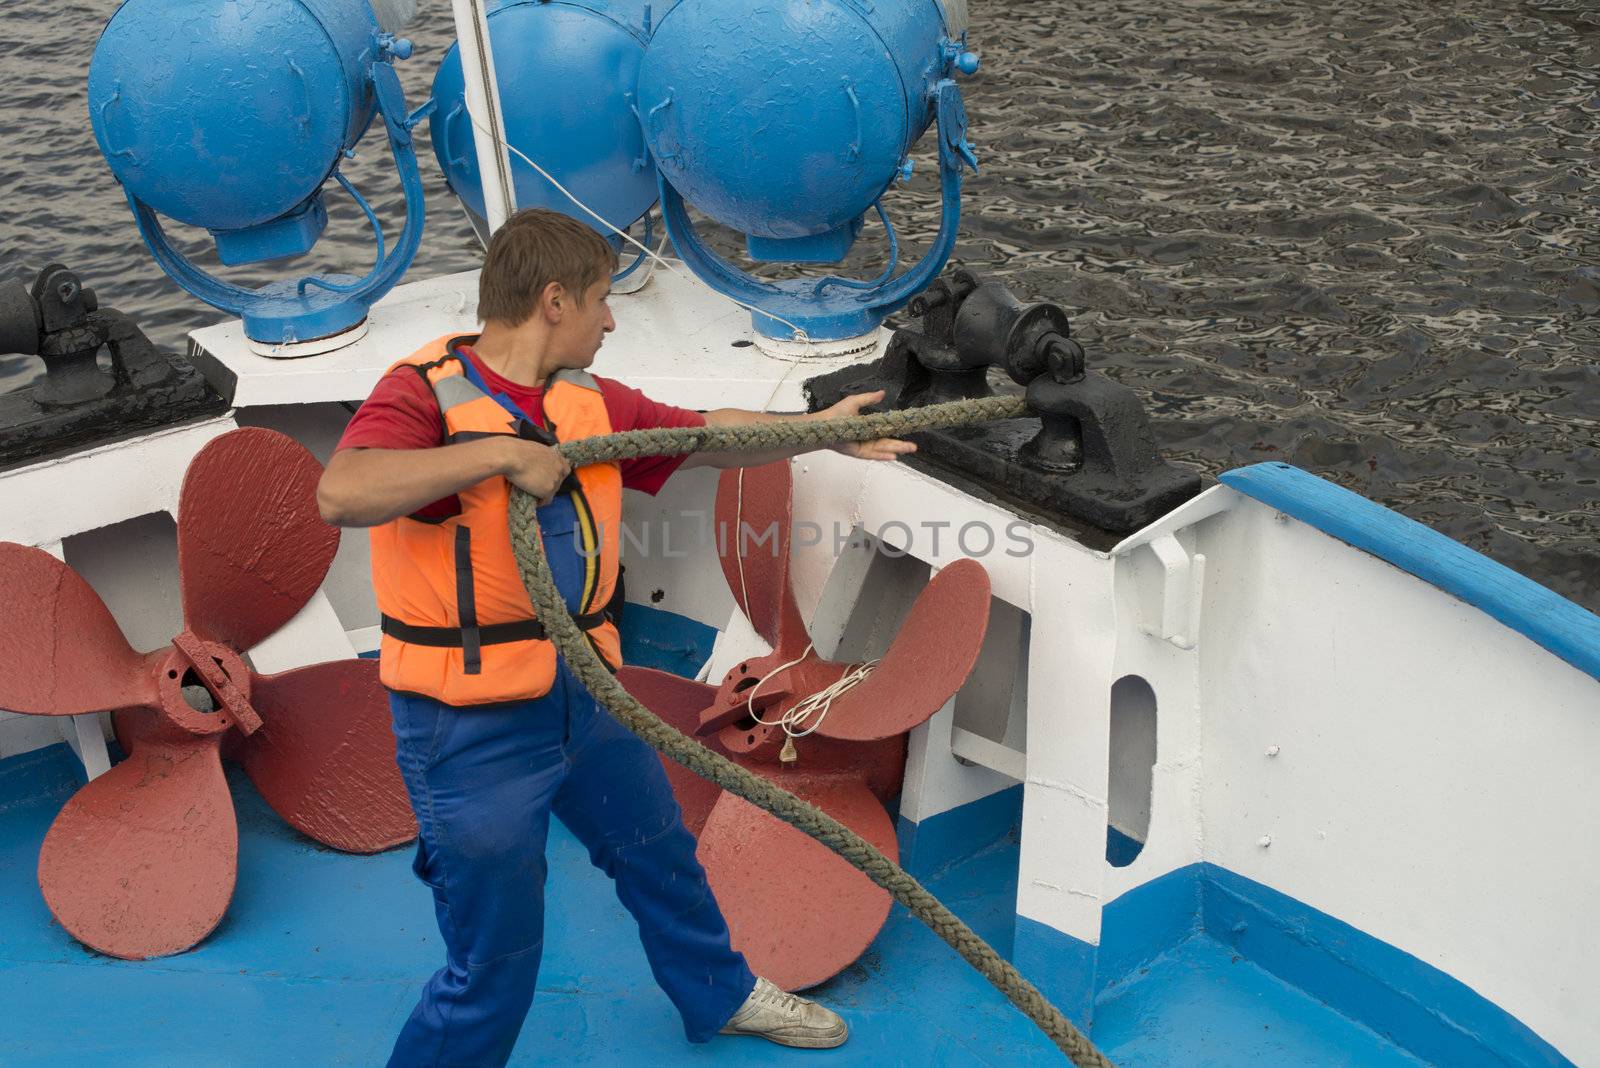 The ship worker prepares a vessel for departure. Taken in Russia, Volga river on July 2012.